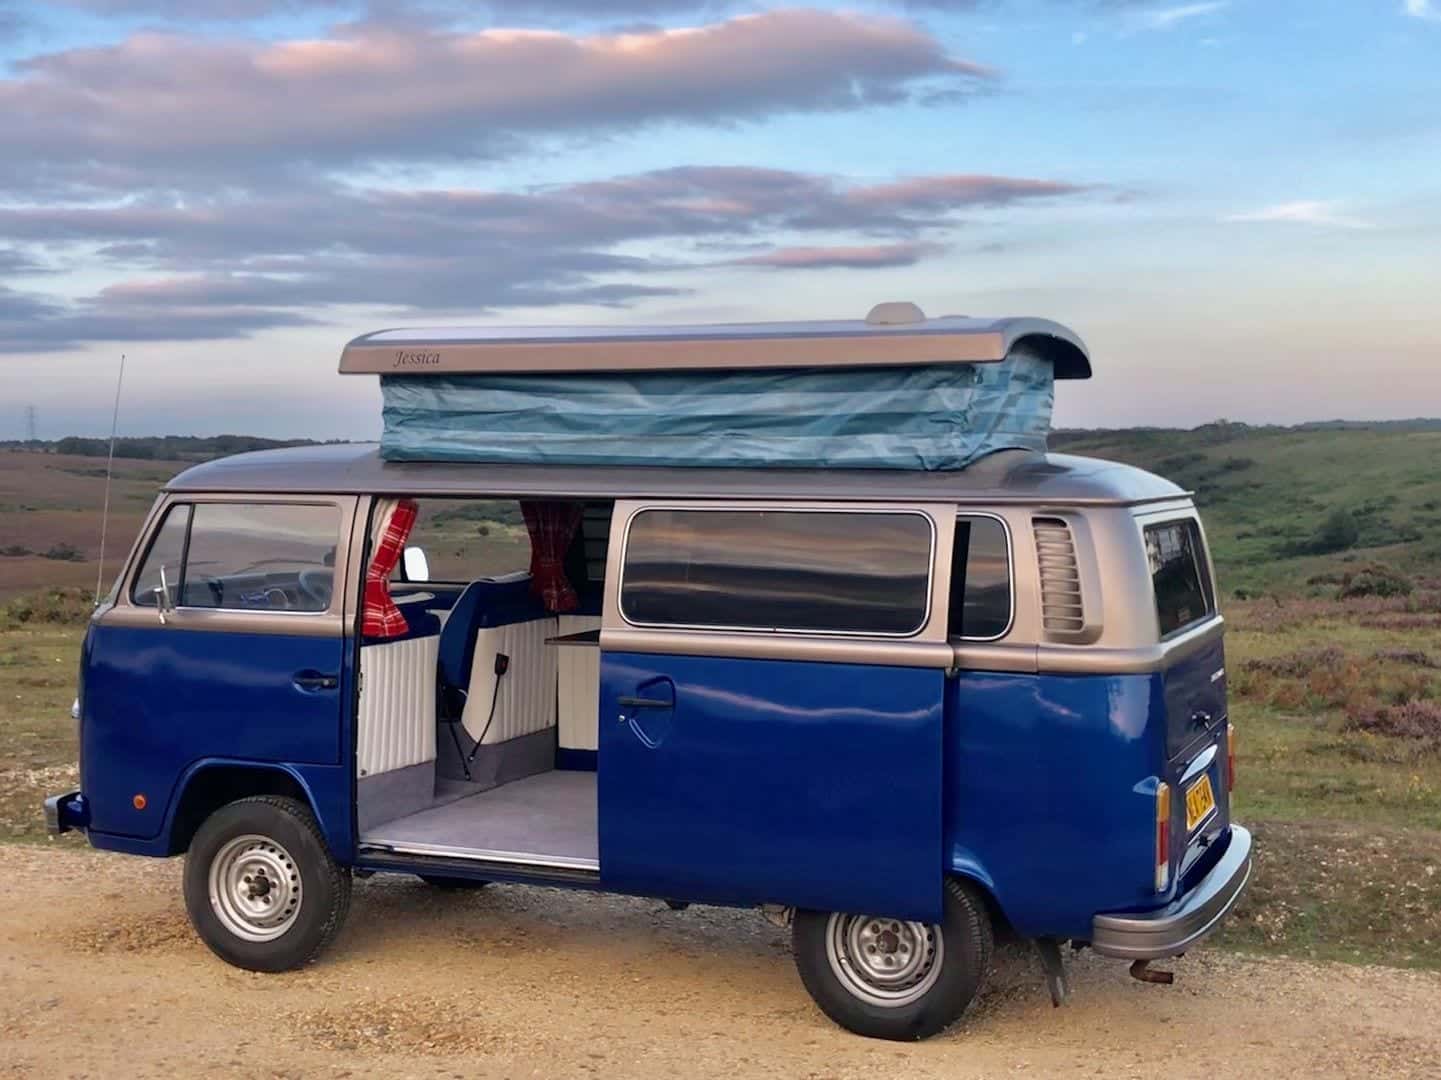 Campervan open fully with roof extended